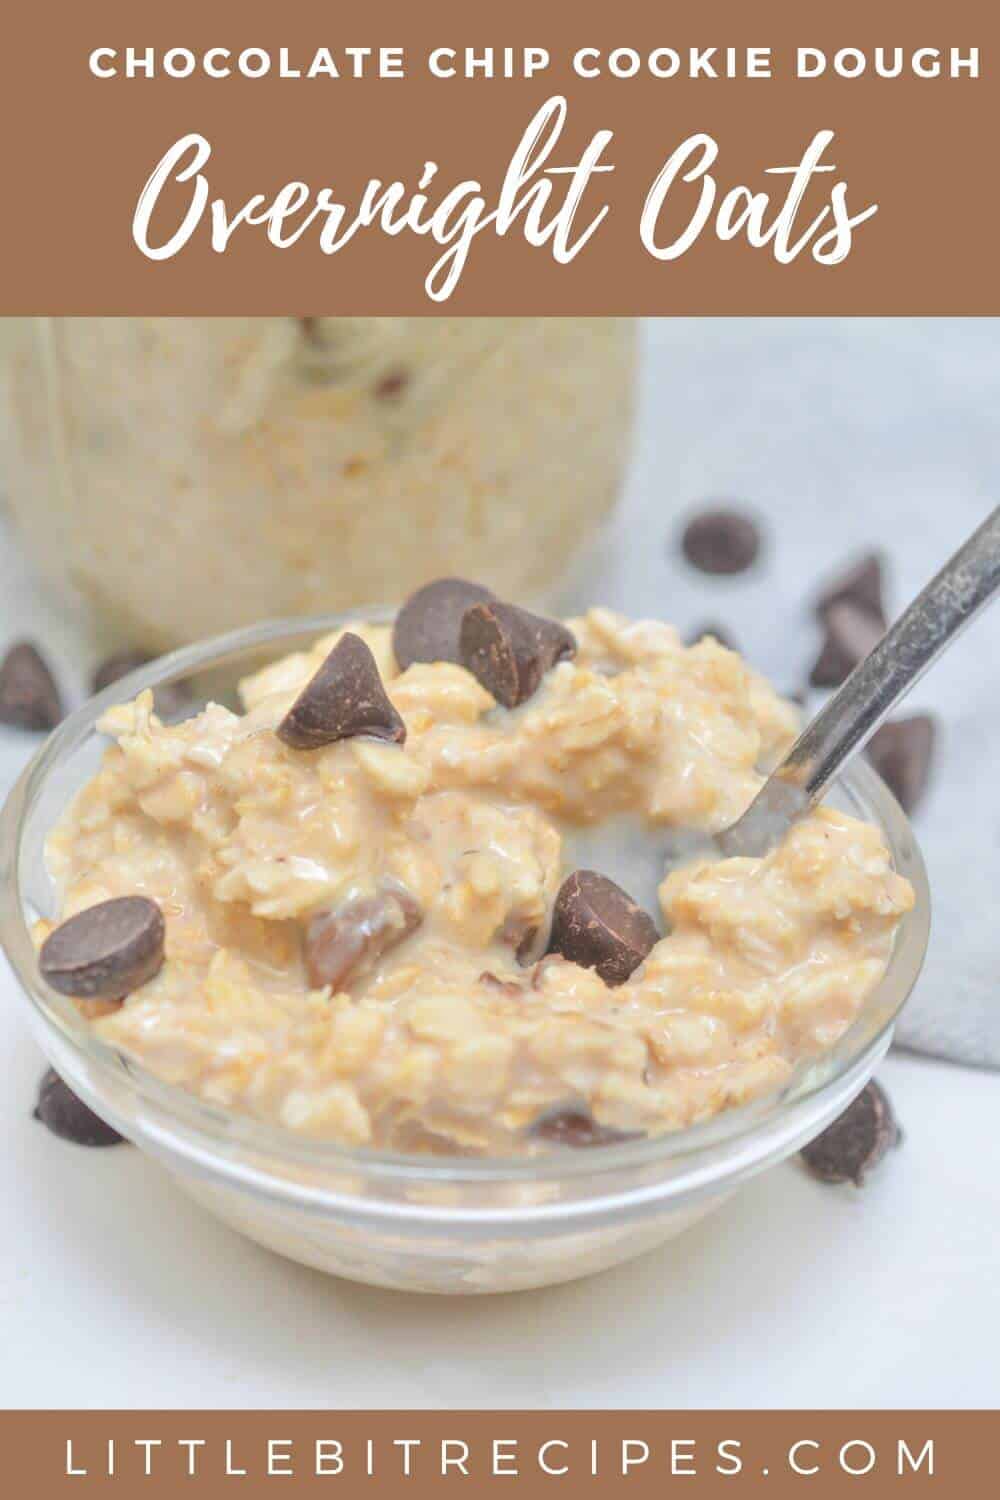 chocolate chip cookie dough overnight oats with text.